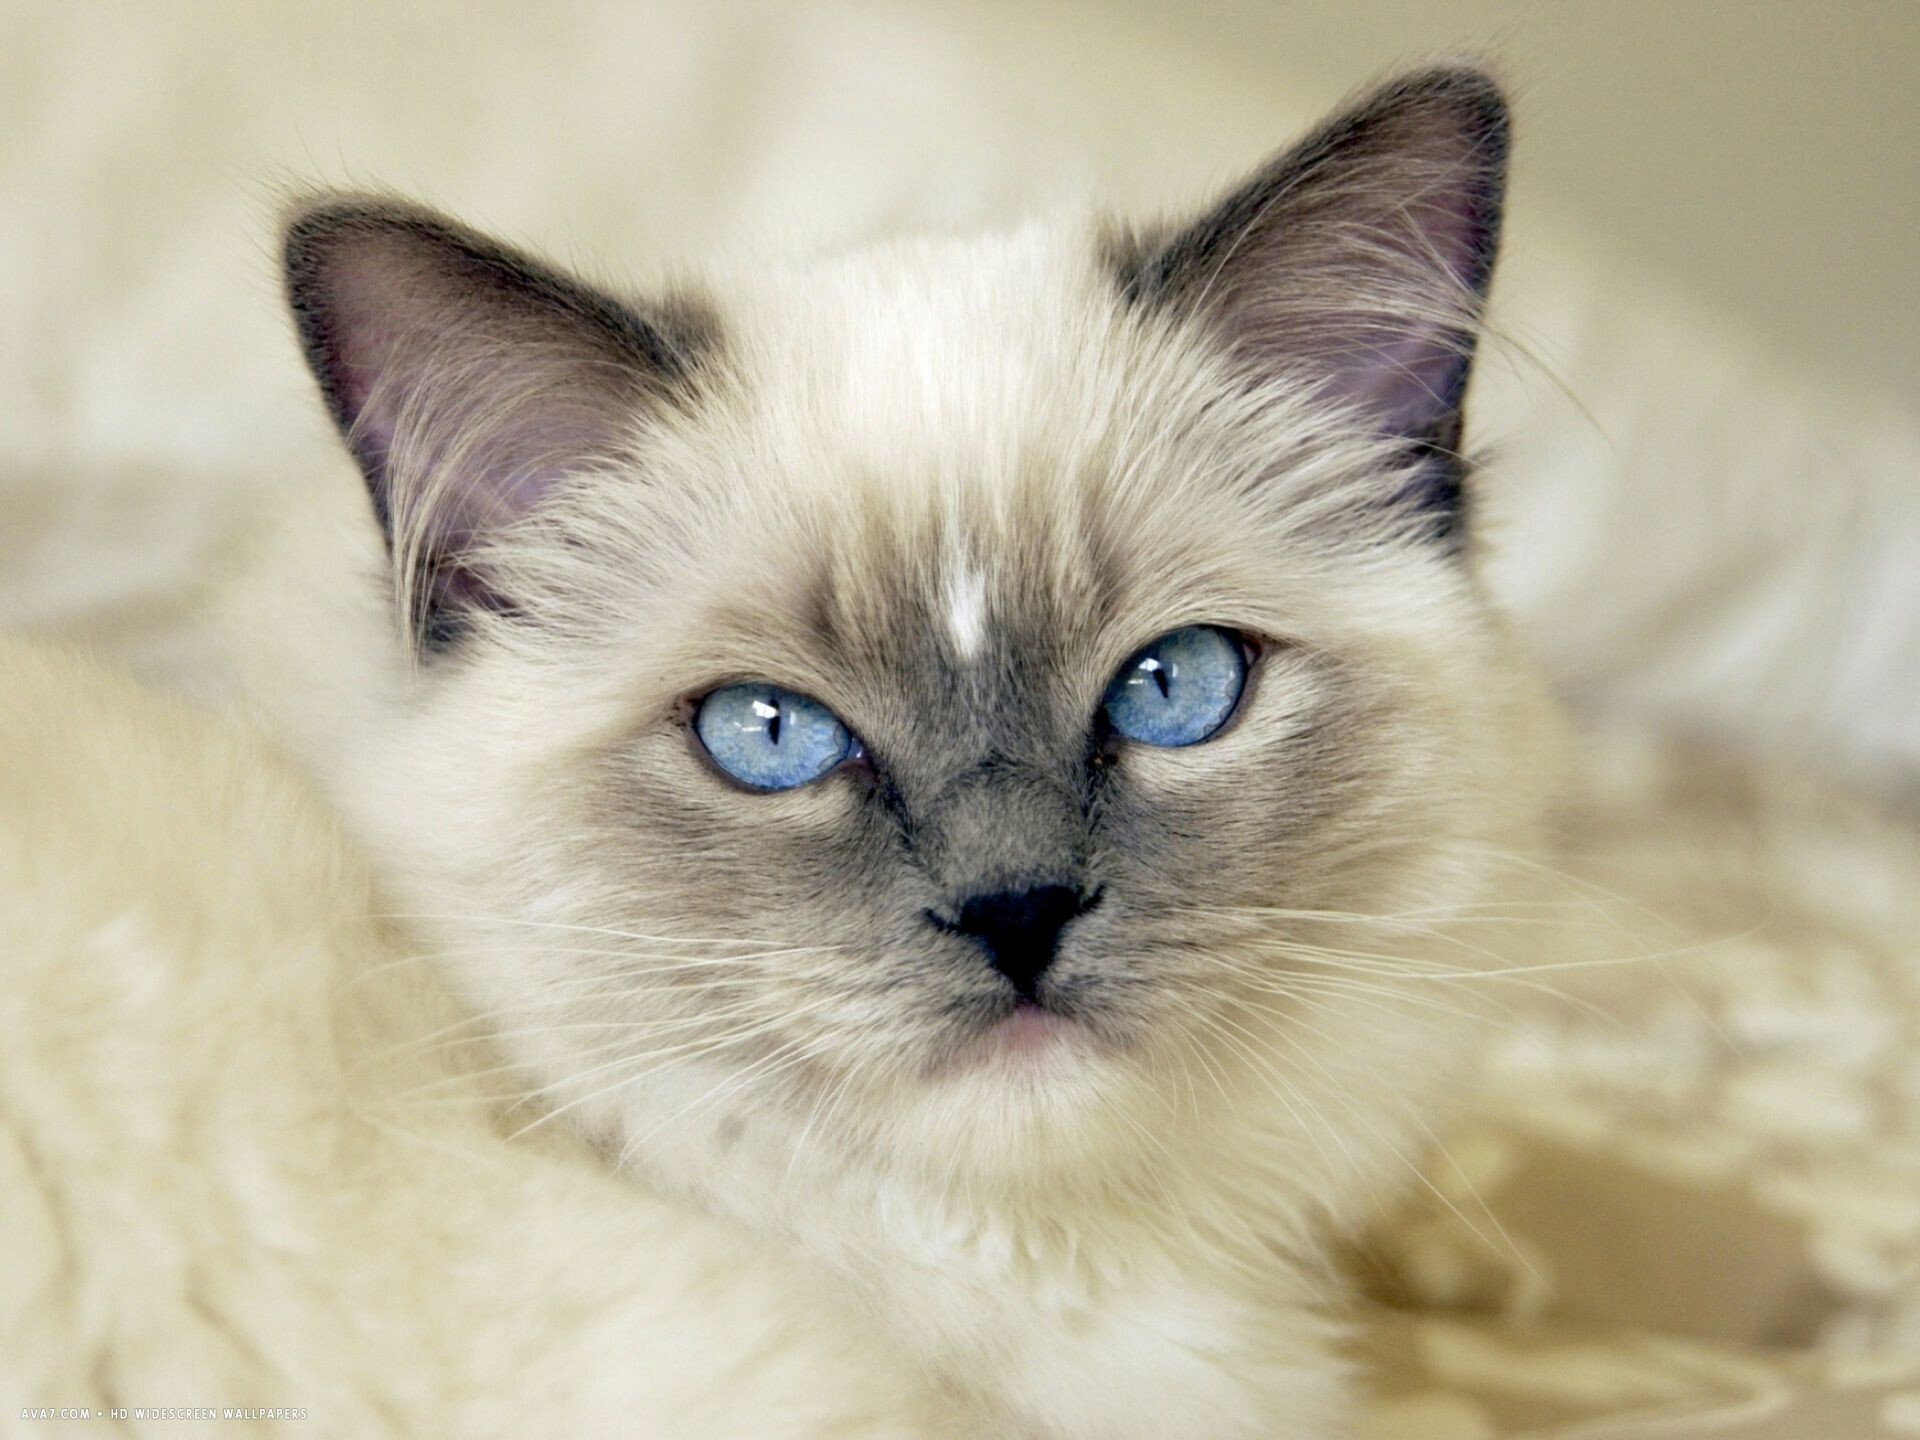 Ragdoll: A well-balanced cat with no extreme features. 1920x1440 HD Wallpaper.